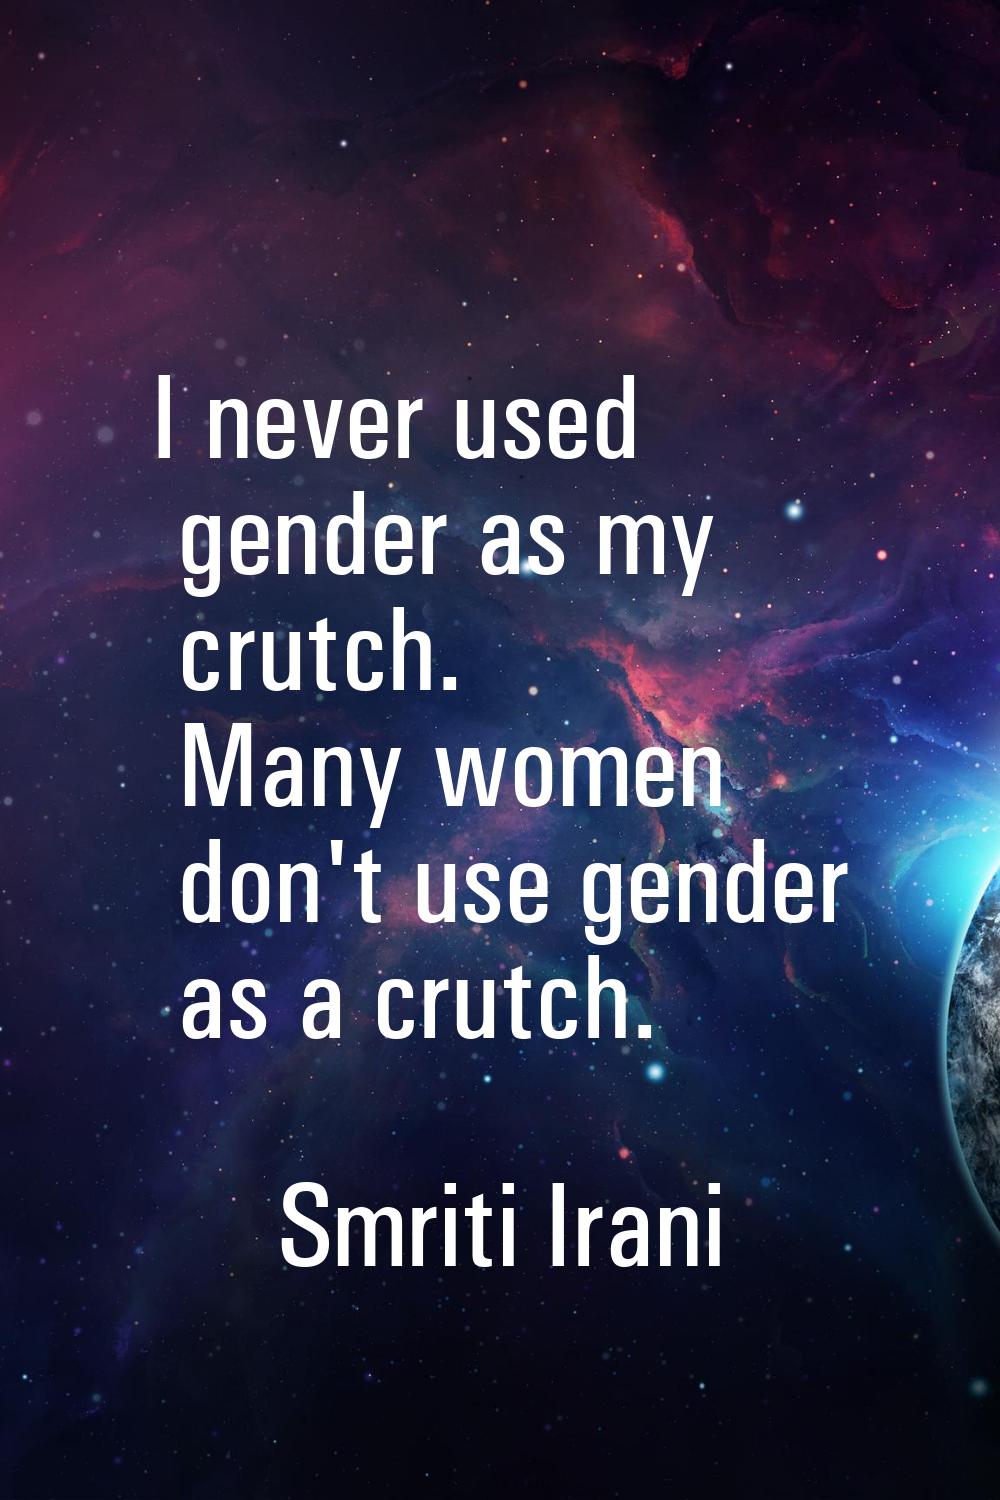 I never used gender as my crutch. Many women don't use gender as a crutch.